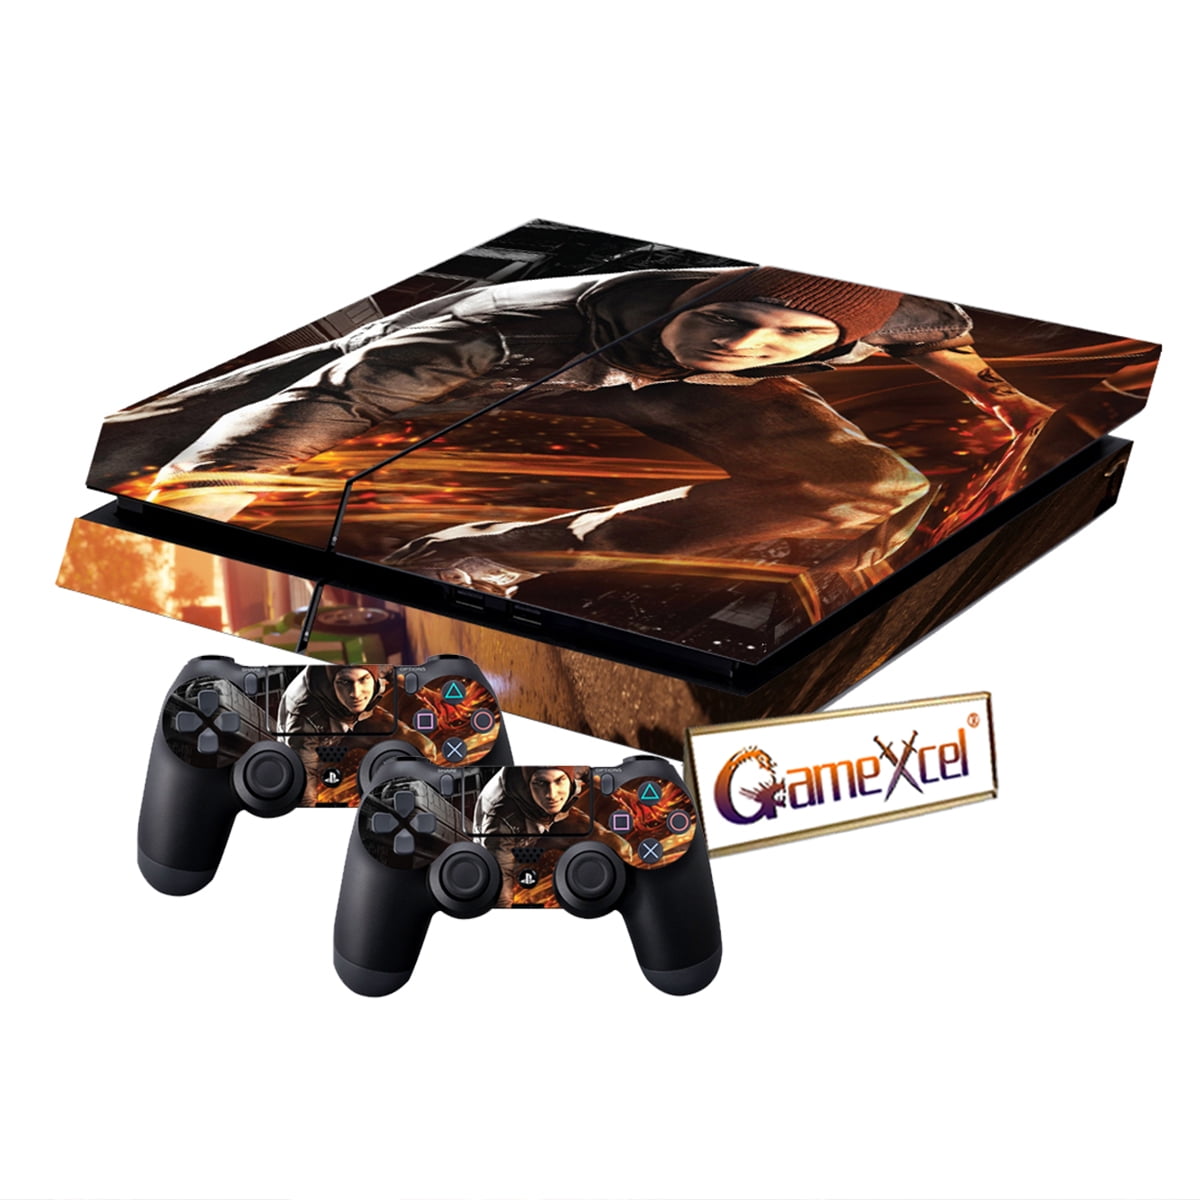 Game Days Gone PS4 Skin Sticker Decal for Sony Dualshock PlayStation 4  Console and 2 controller skins PS4 Stickers Vinyl - AliExpress